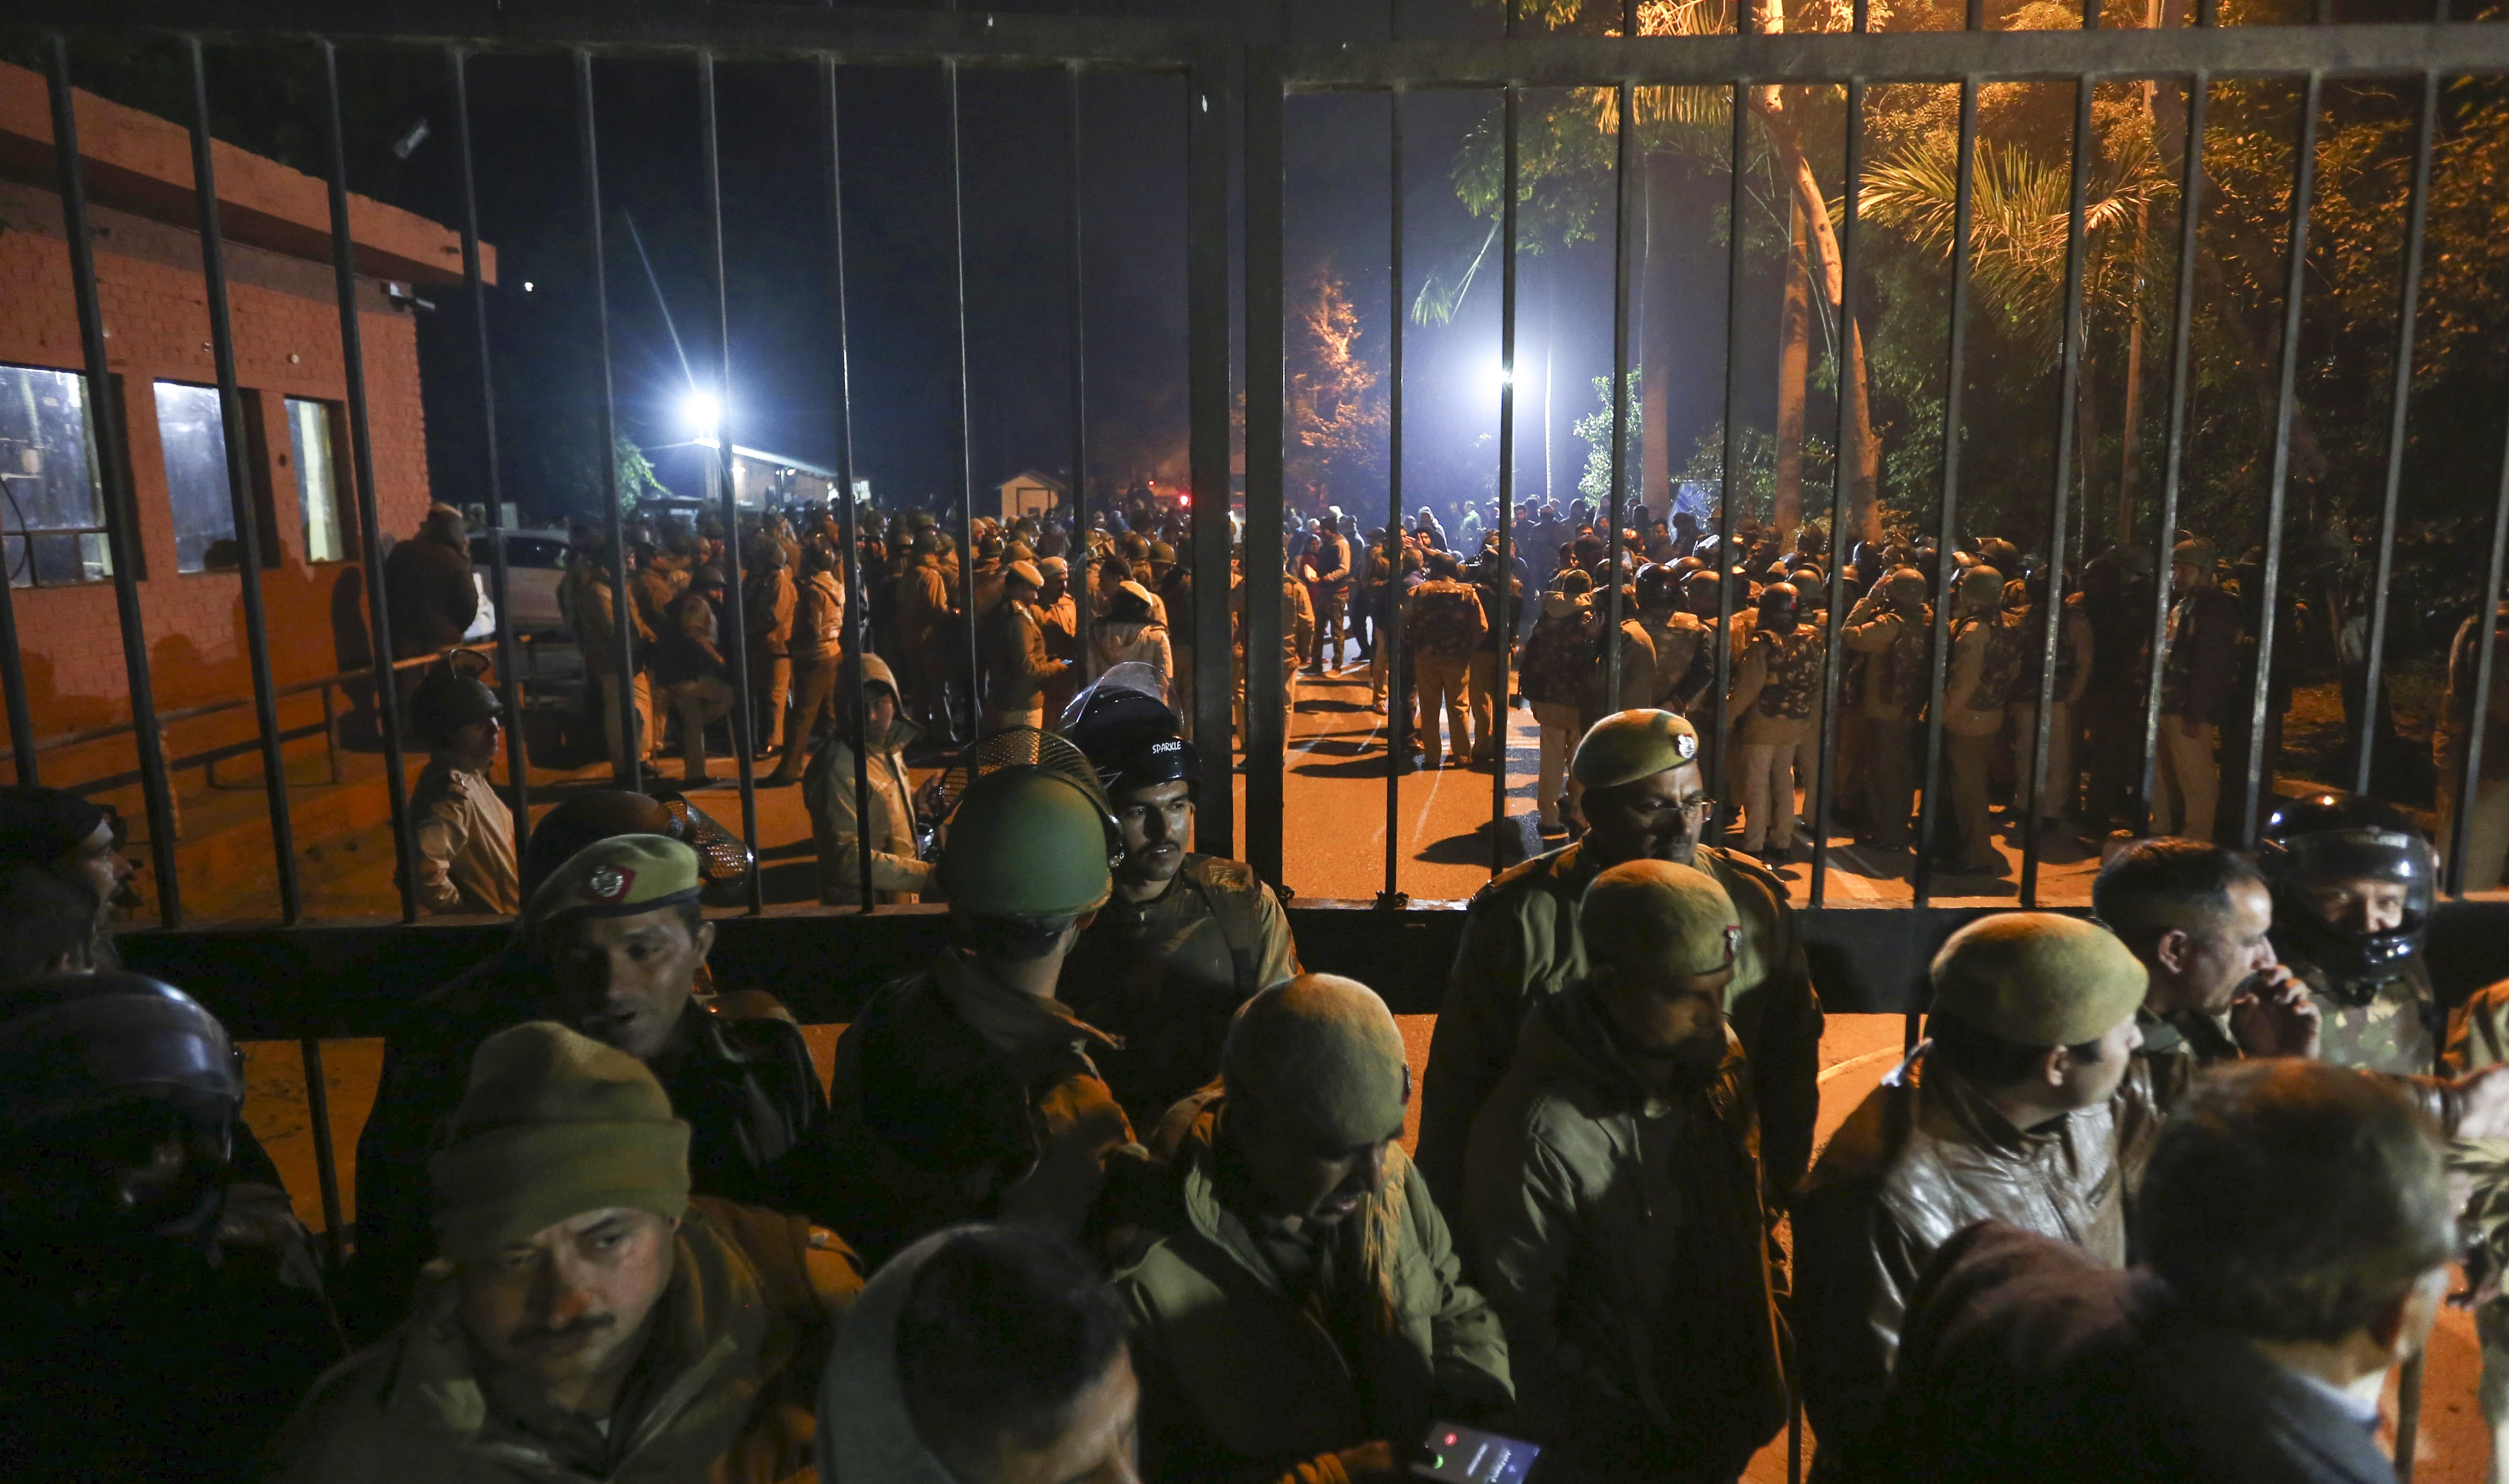 Police arrive at the Jawaharlal Nehru University in New Delhi, India, after masked assailants beat students and teachers with sticks. Photo: AP